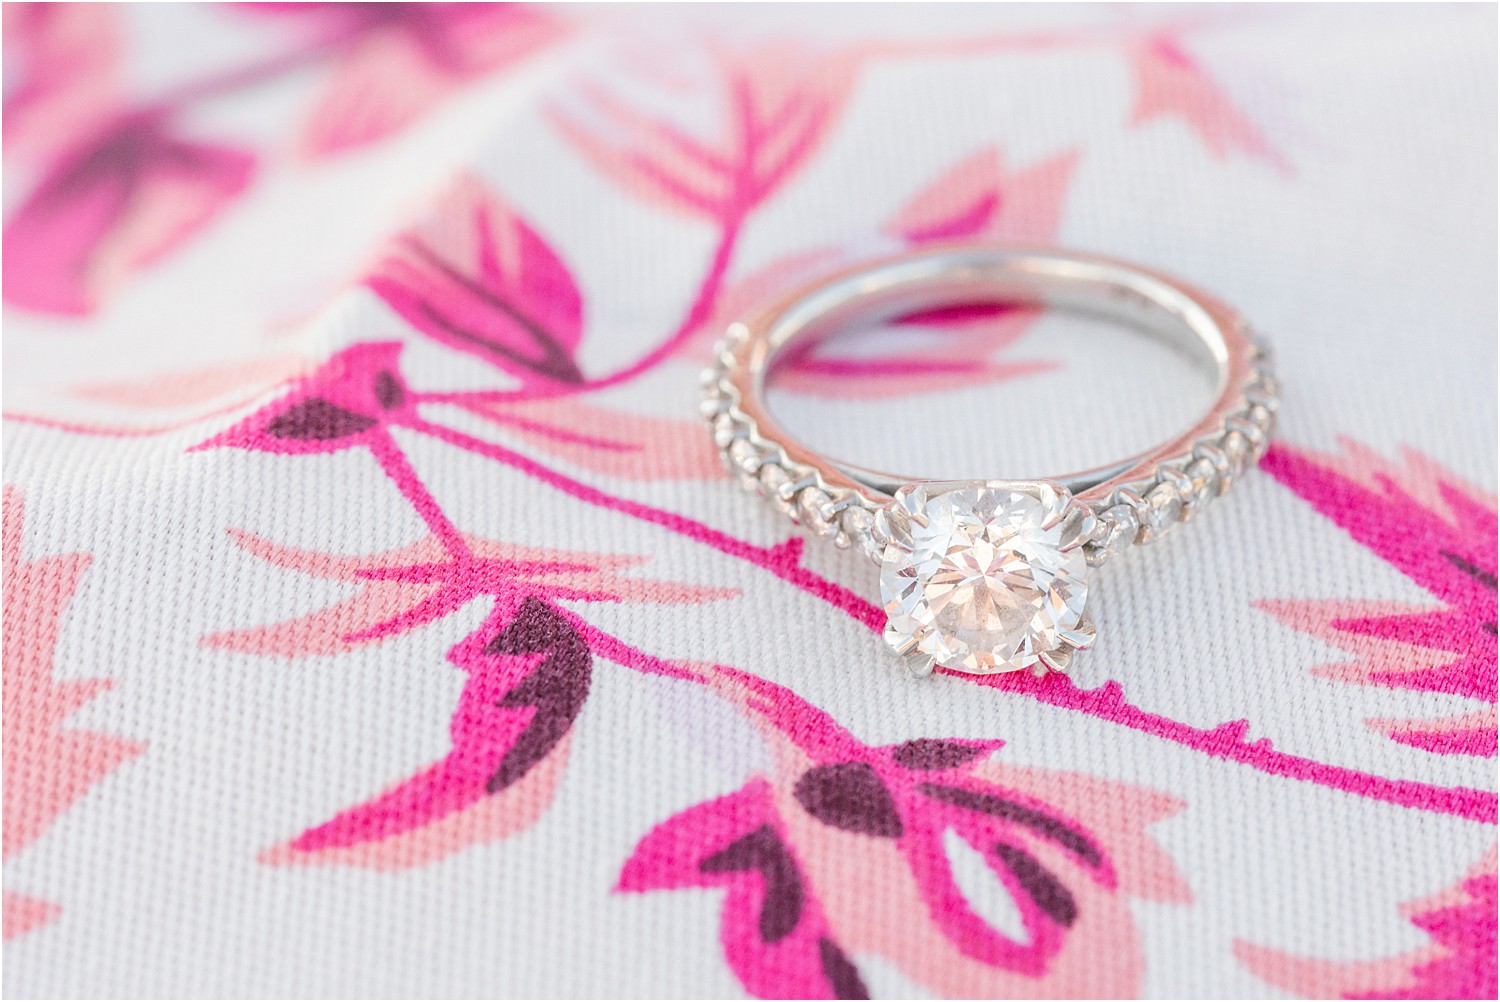 Engagement ring on fabric of woman's dress from Belmar Marina + Beach Engagement Session